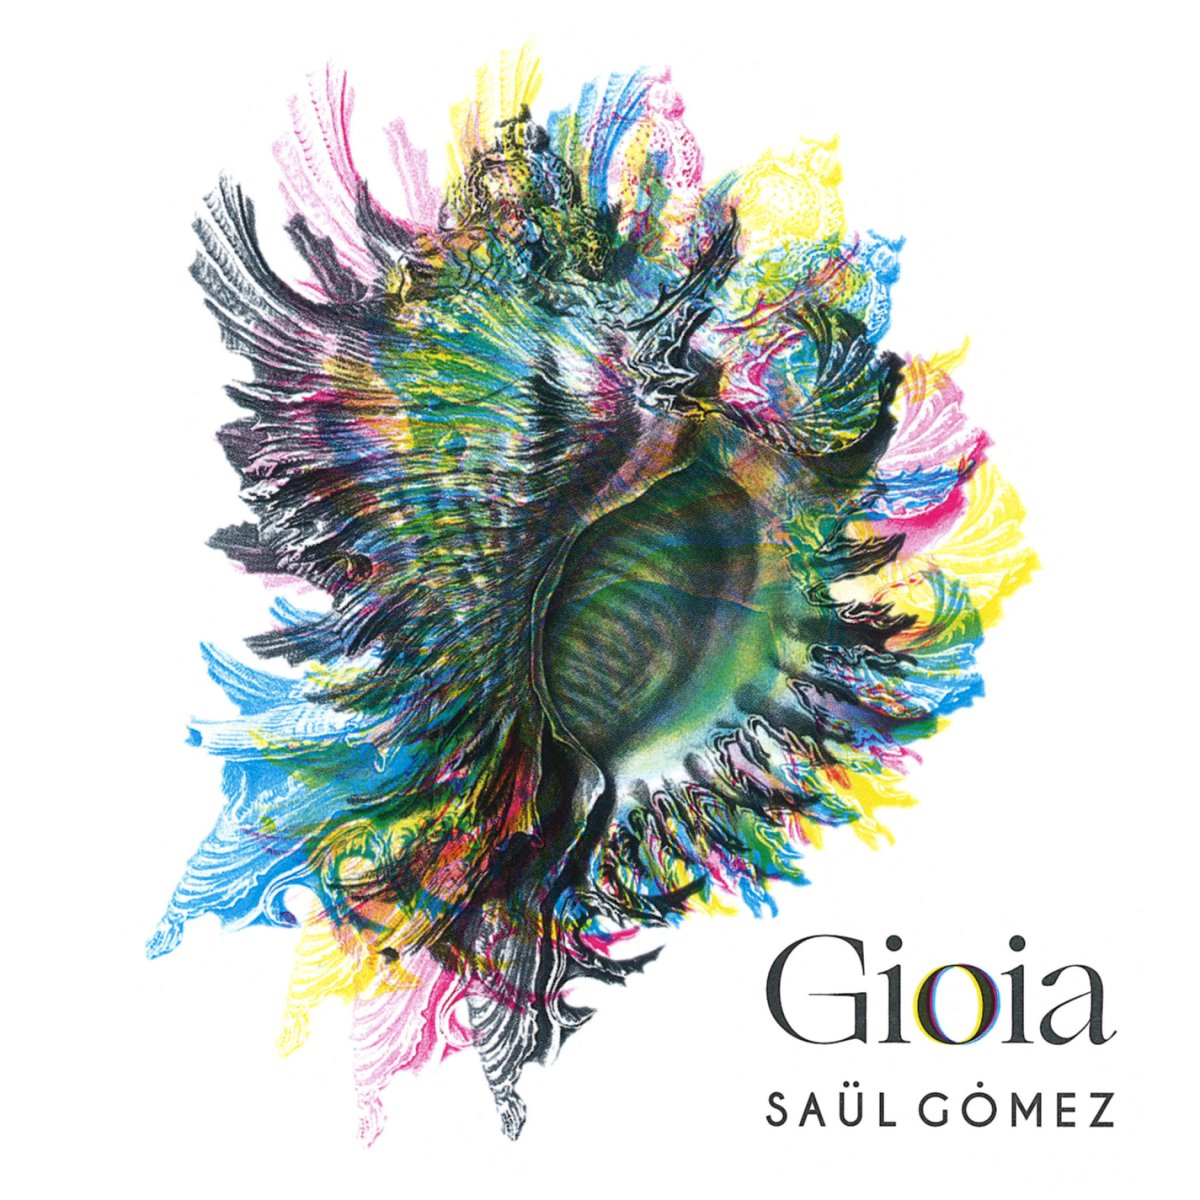 Gioia (New Compositions by Sal Gmez Soler) - hacer clic aqu